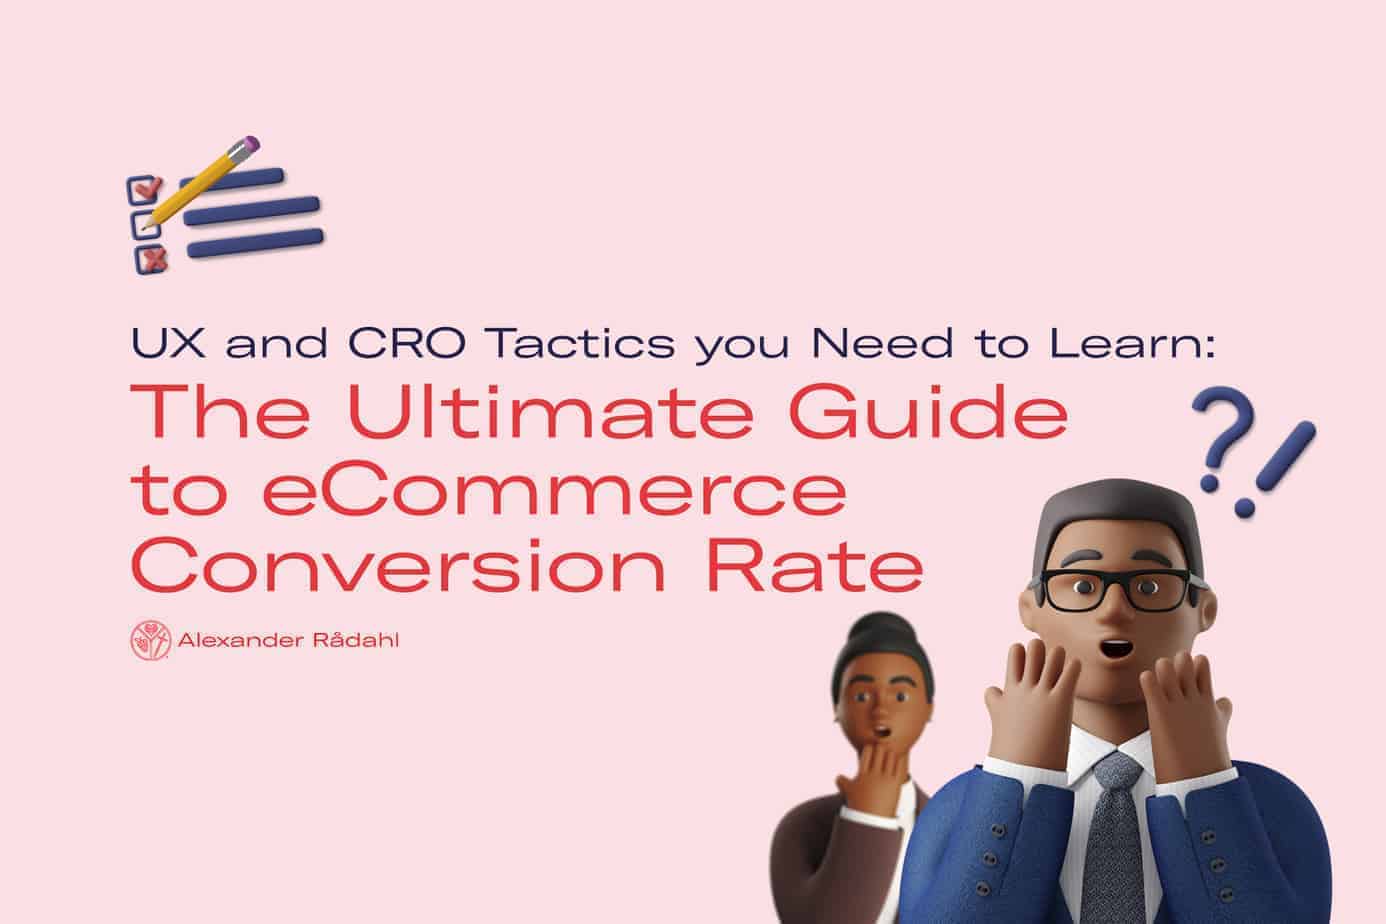 The ultimate guide to ecommerce conversion rate: ux and cro tactics you need to learn!